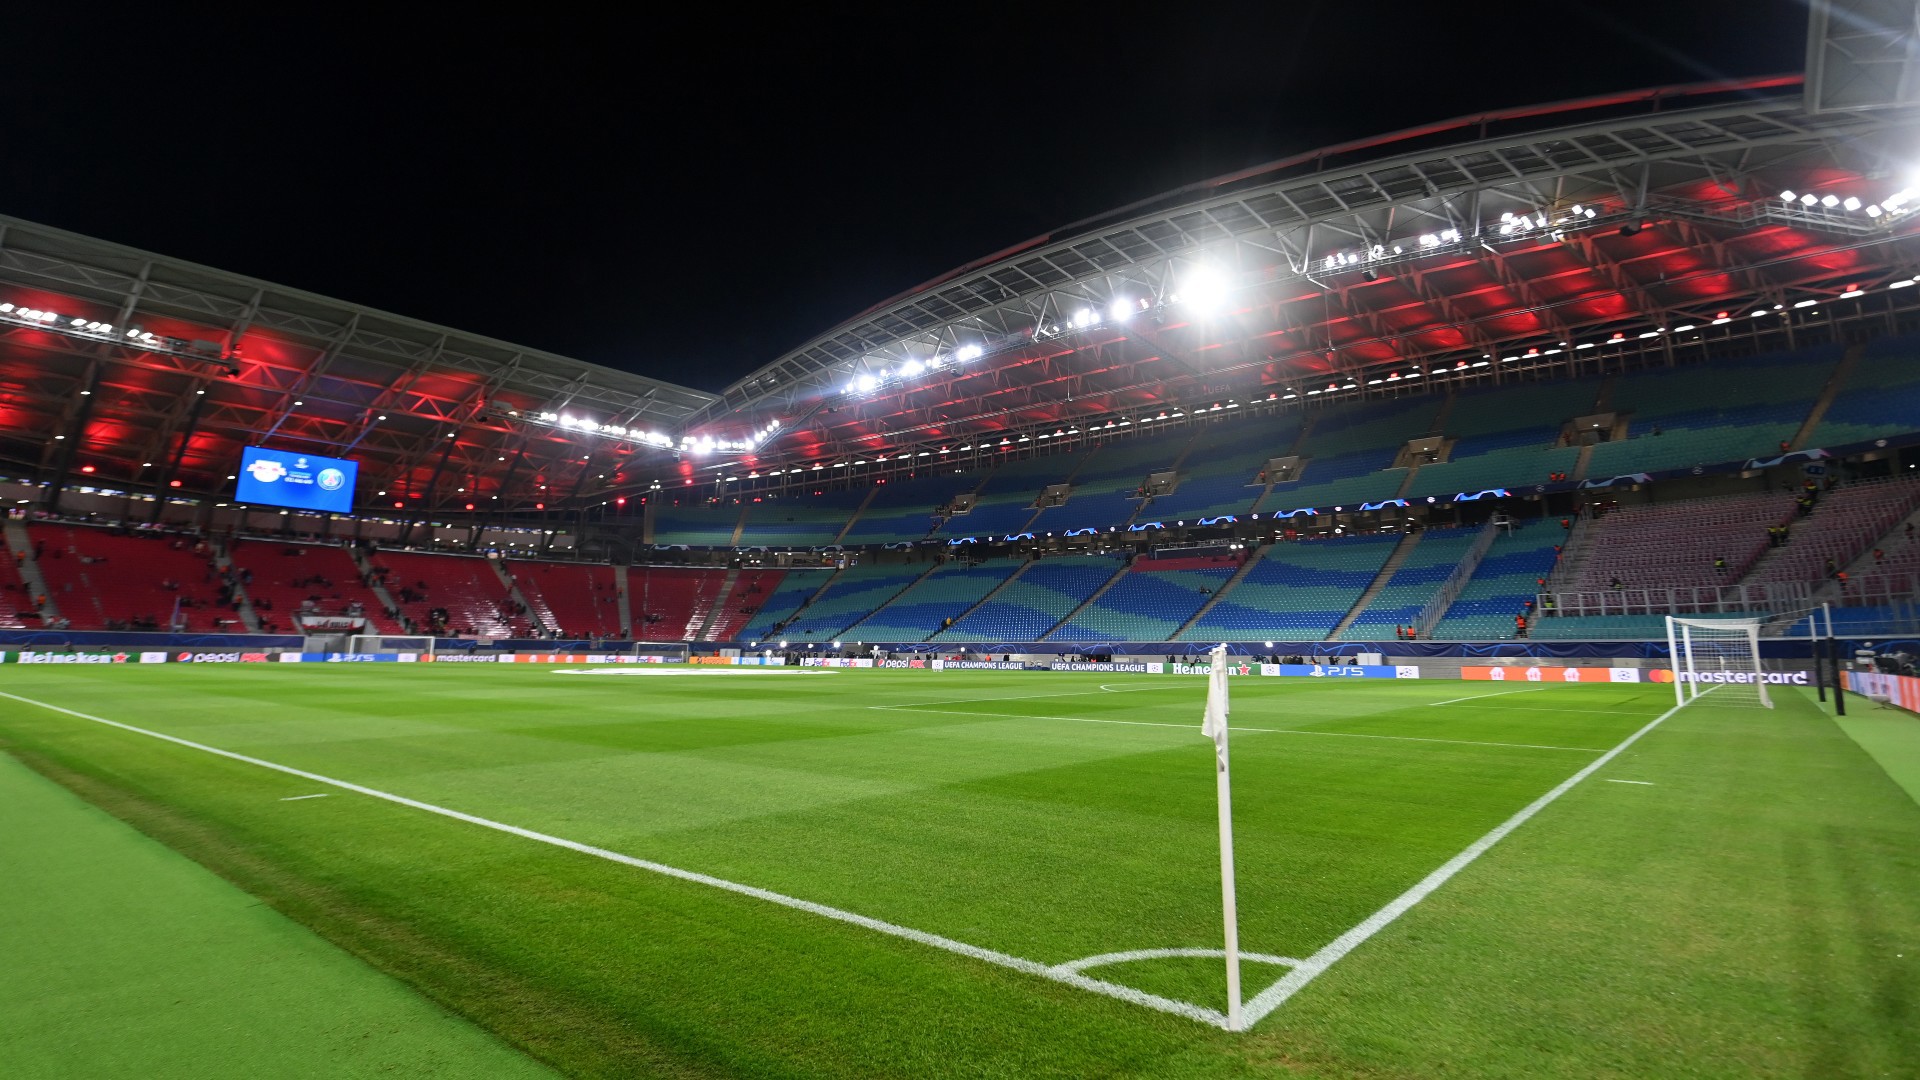 RB Leipzig vs Manchester City to be played behind closed doors